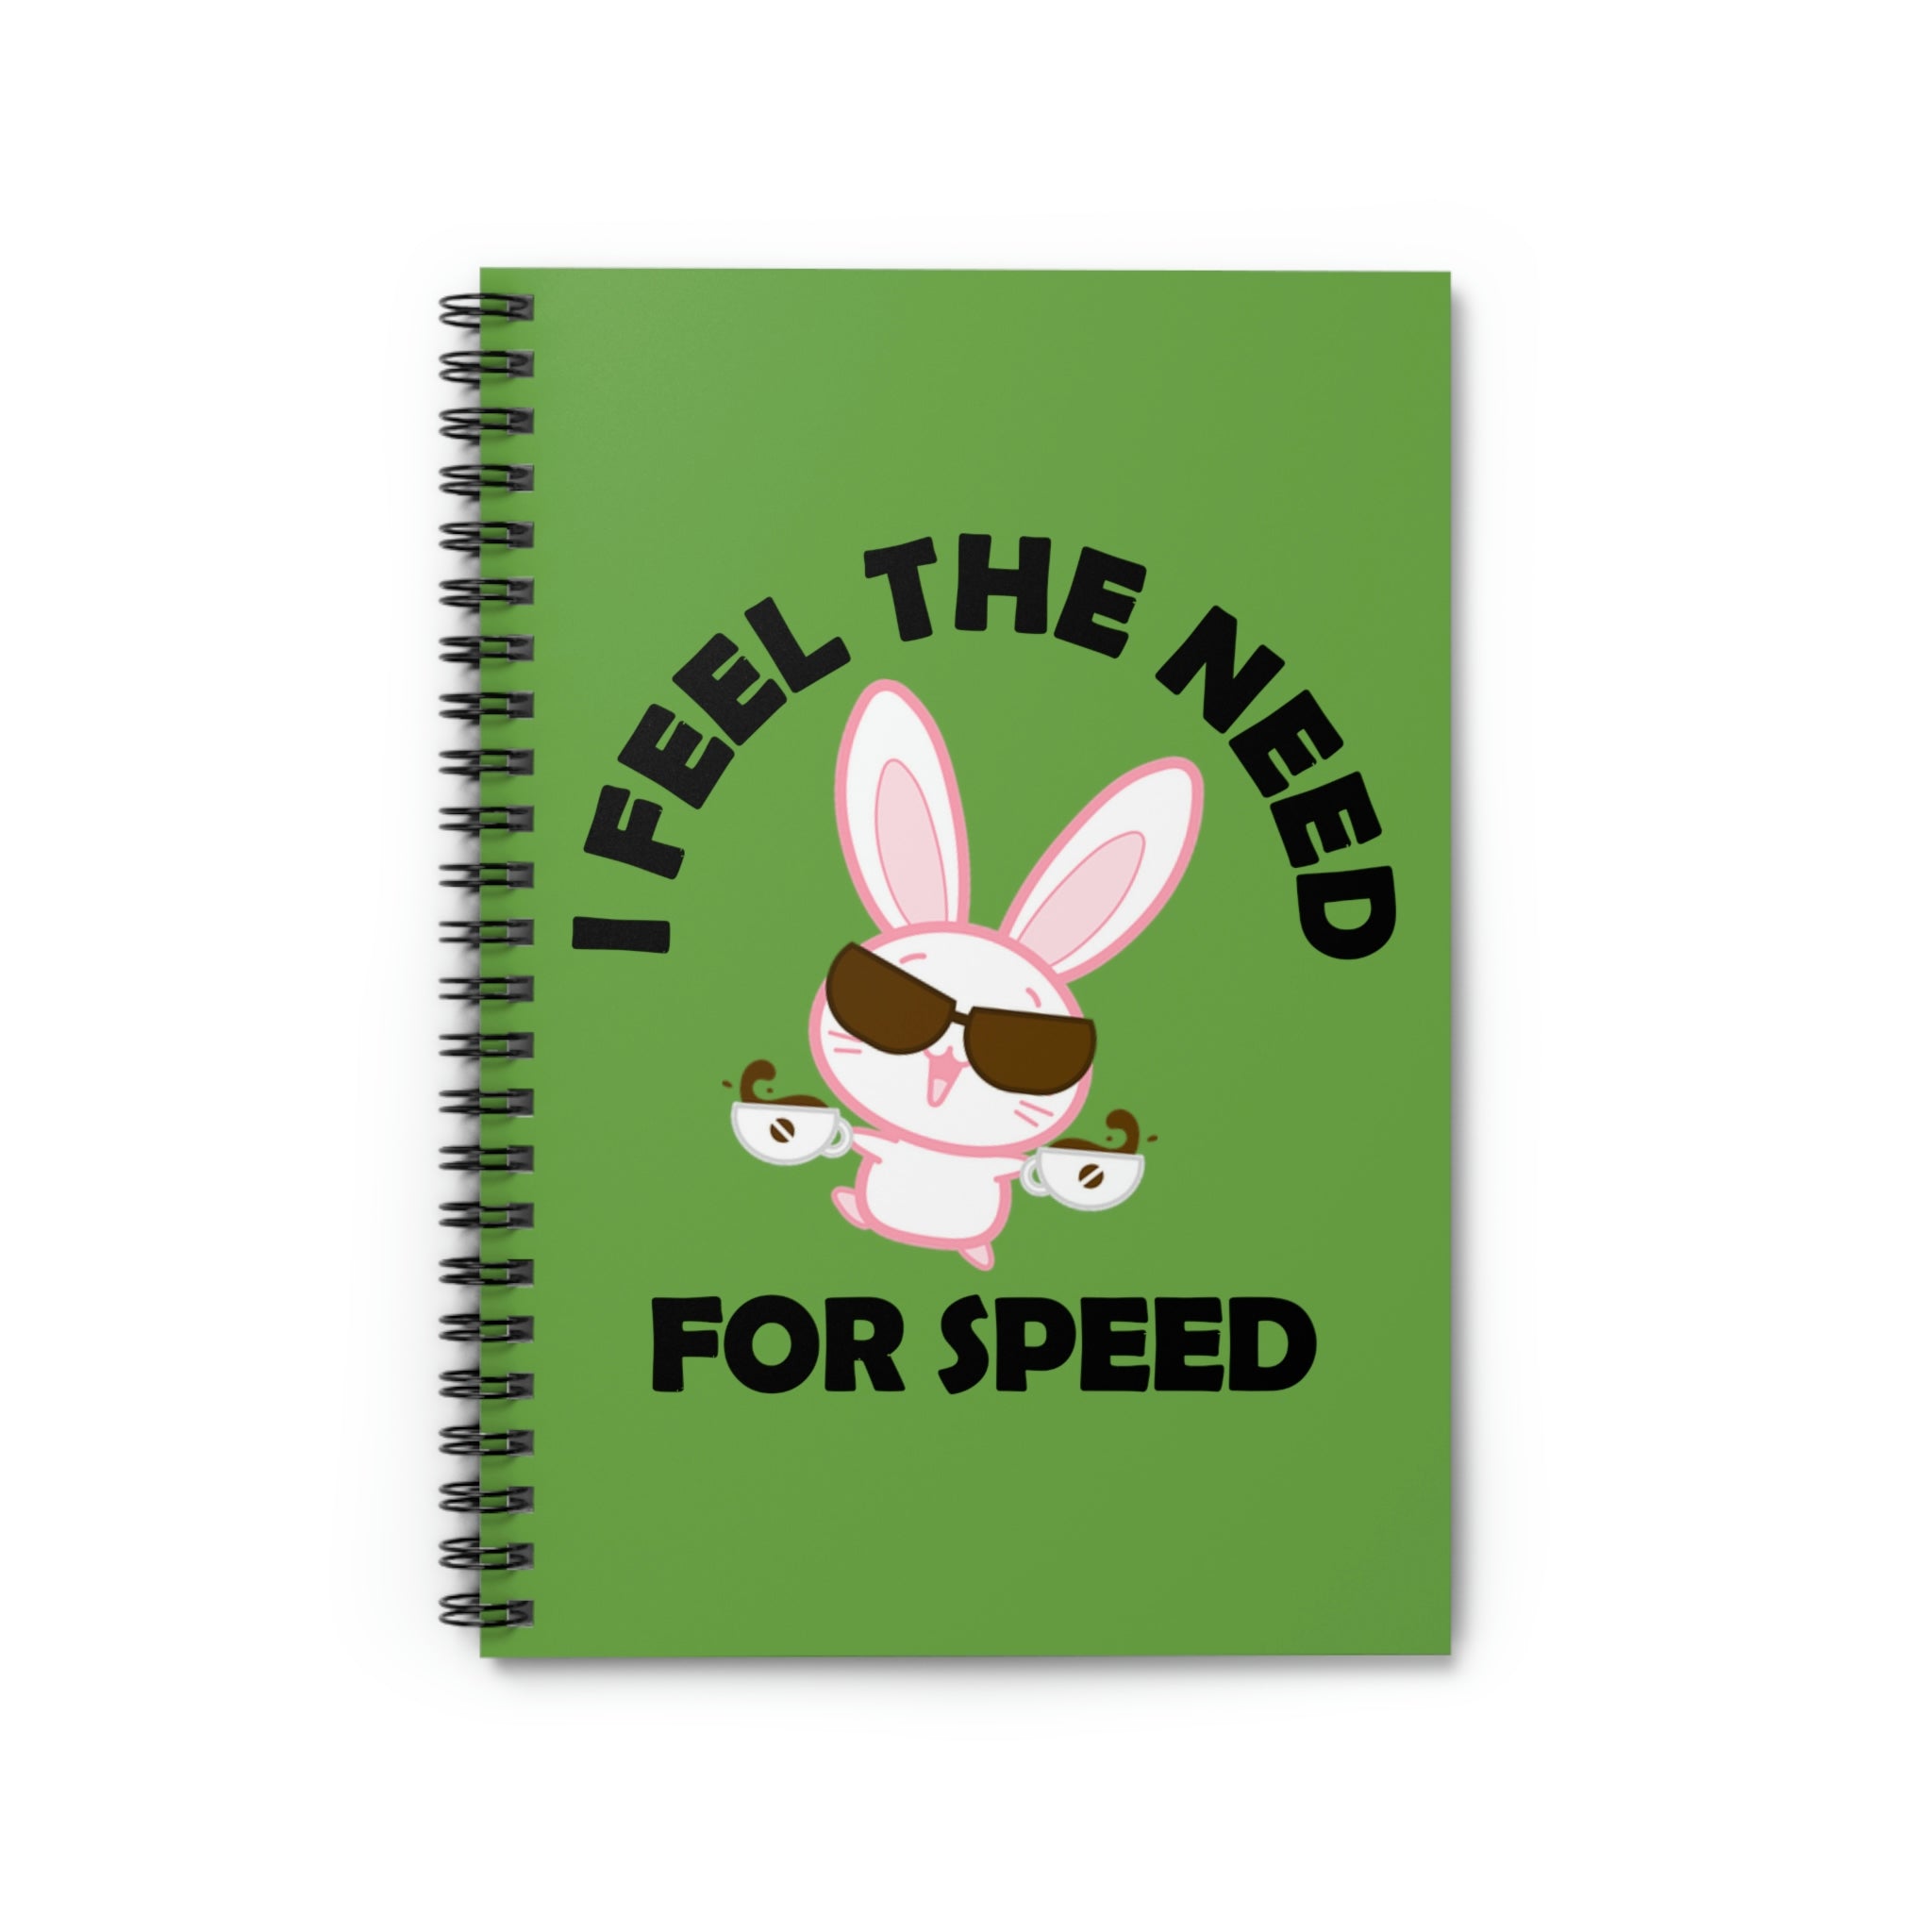 Bunny's Need For Speed, Spiral Lined Notebook (B)